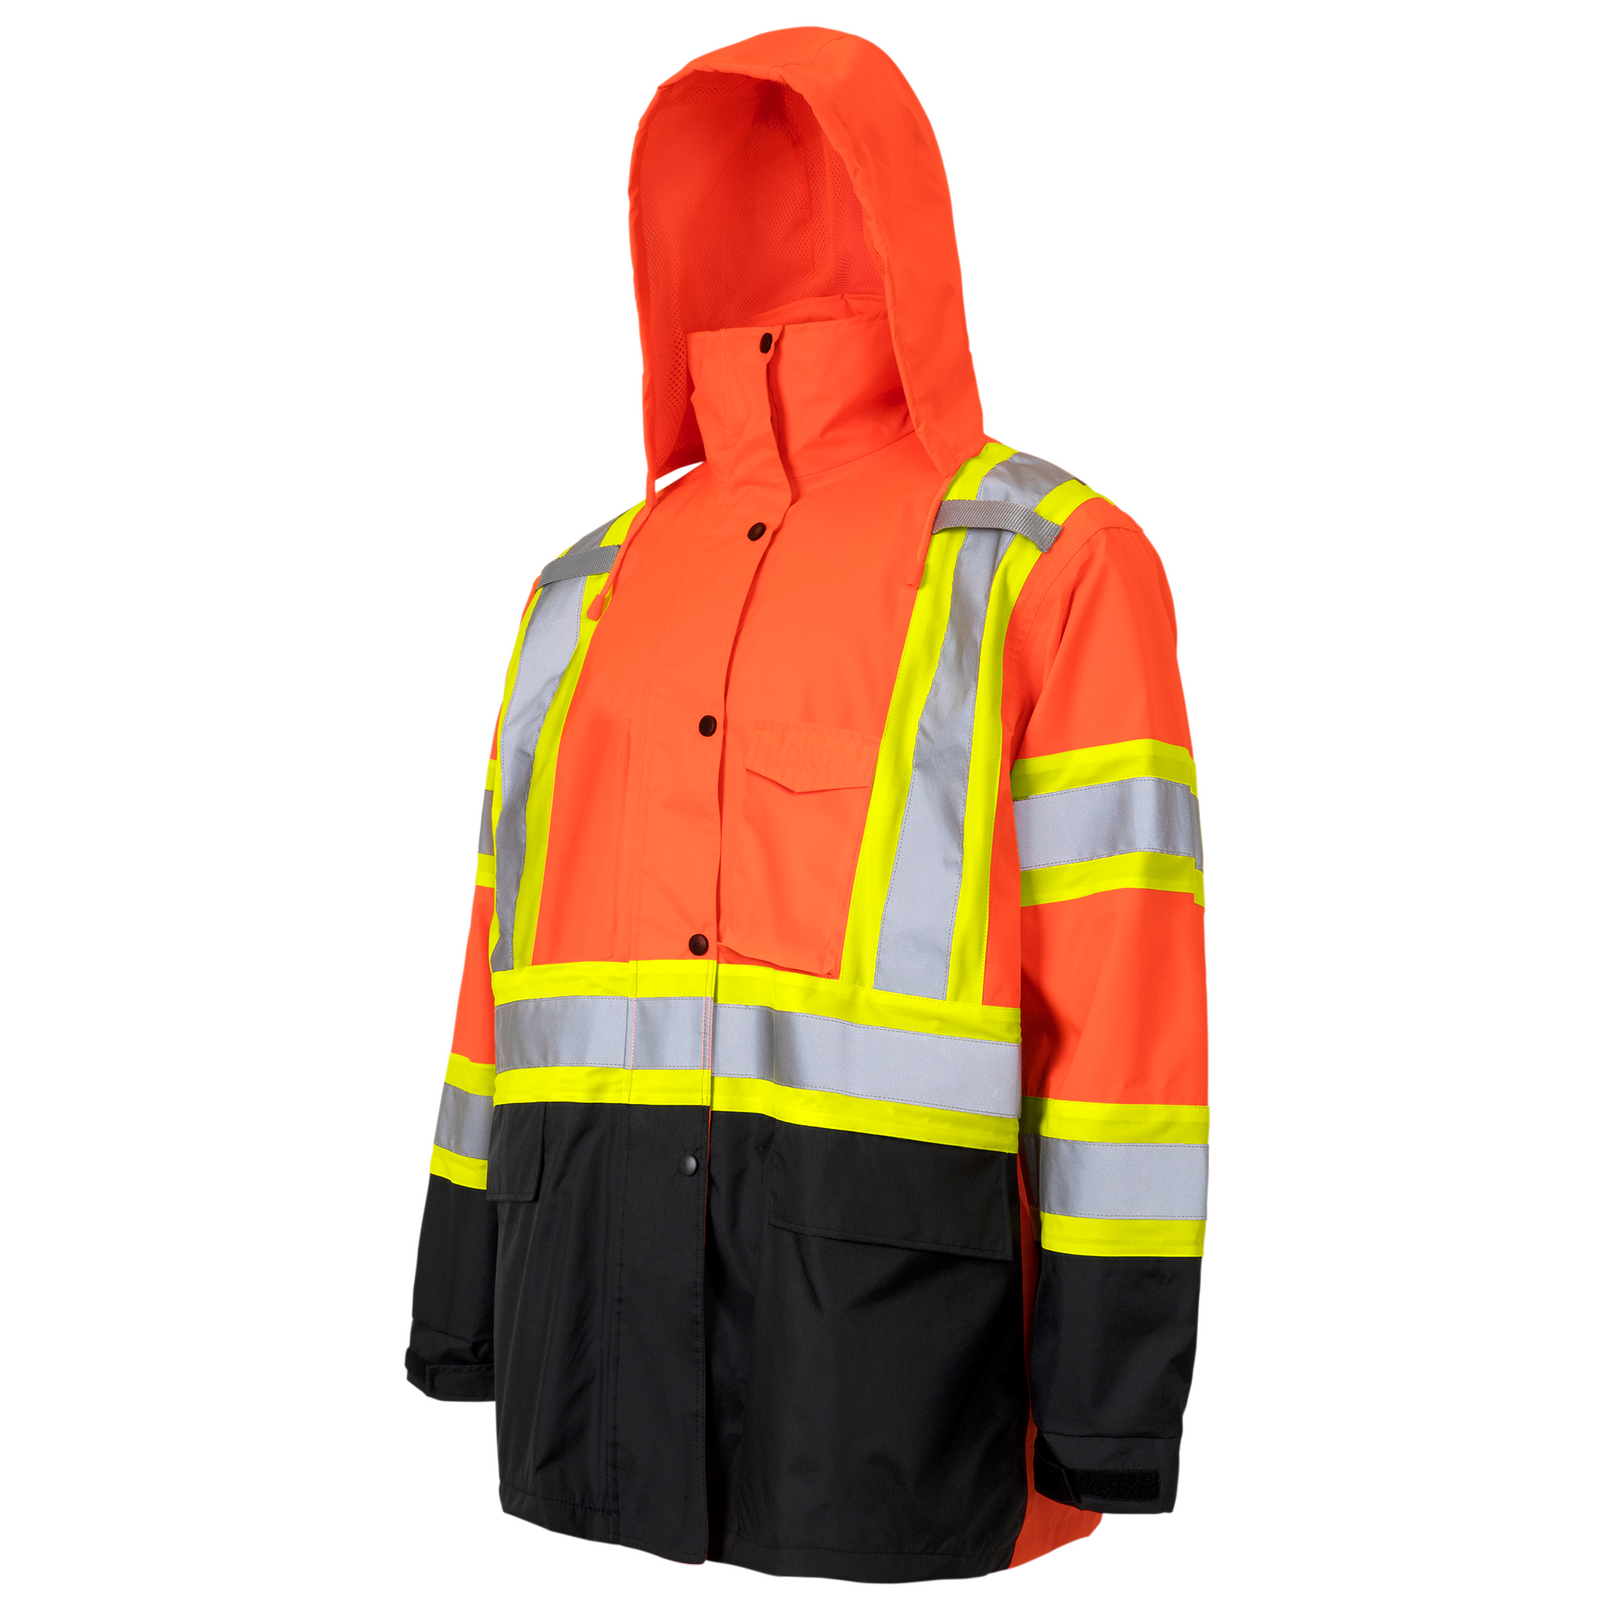 LW70 Women's High Visibility Jacket, Yellow - Portwest - iWantWorkwear